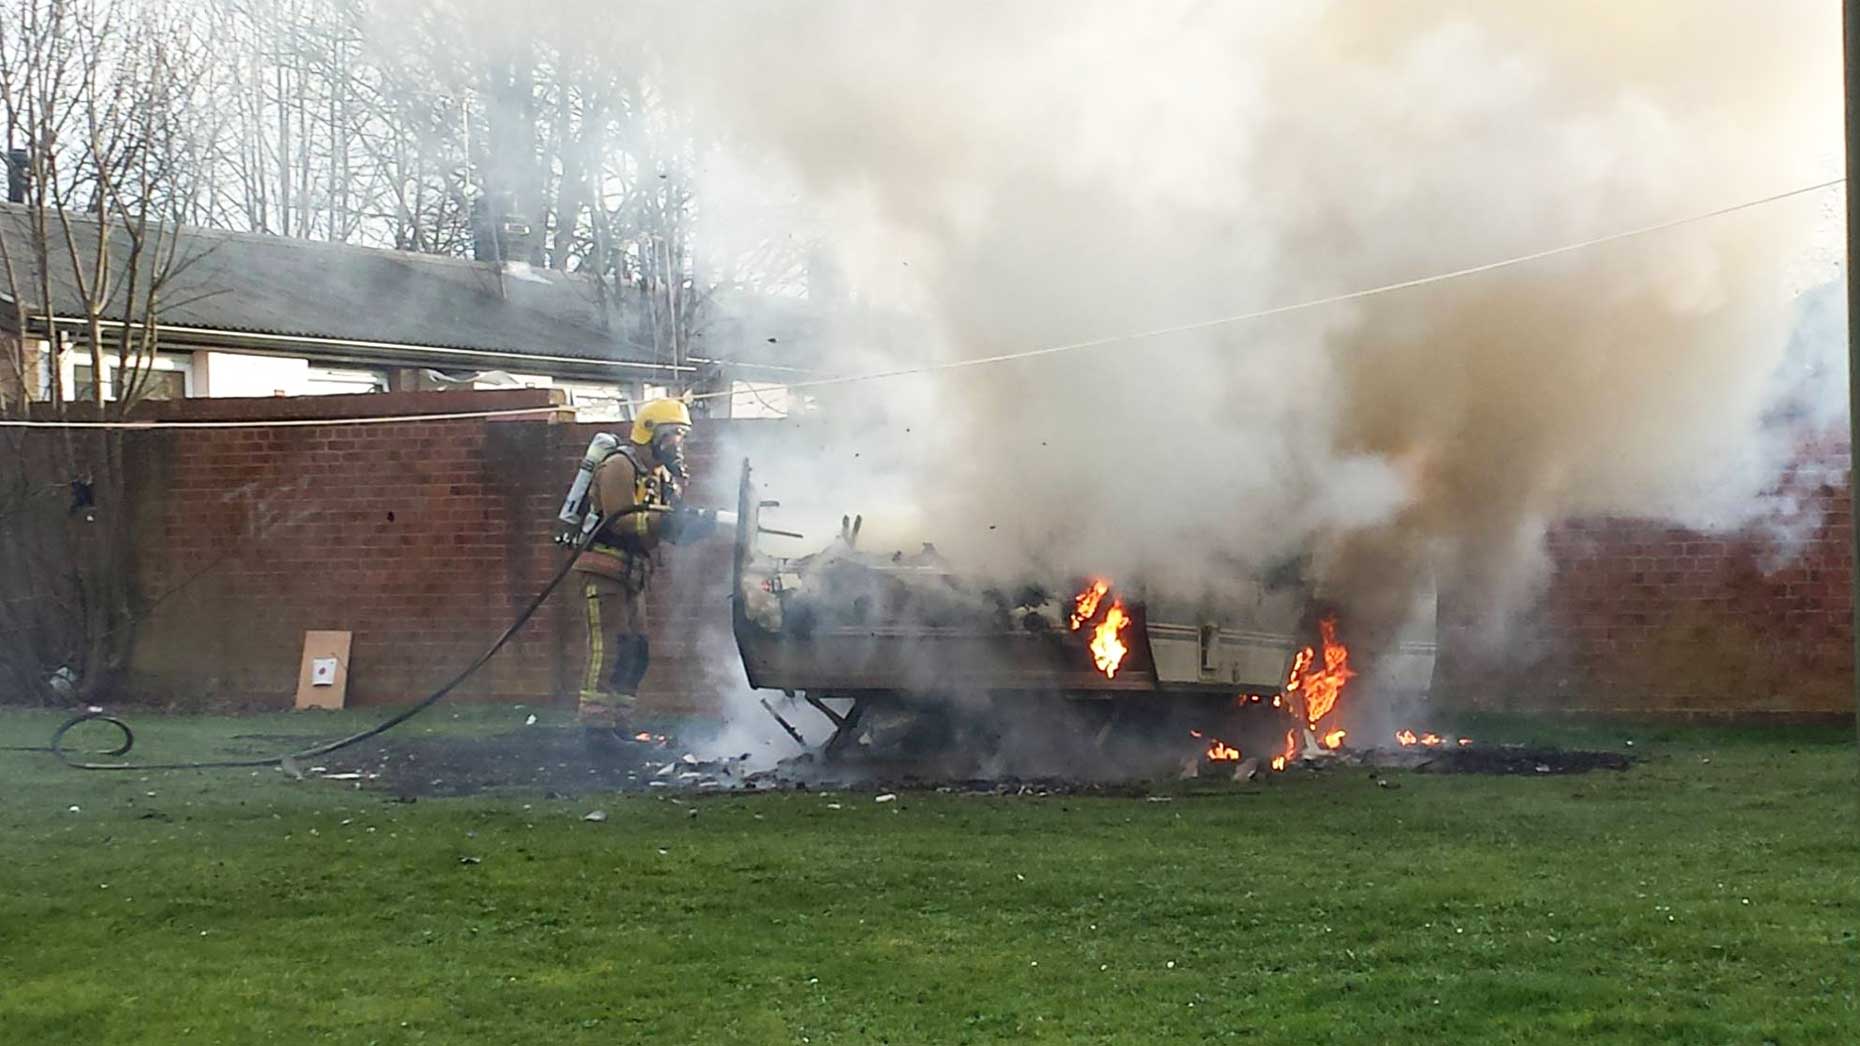 Firefighters extinguished a caravan on fire on Browning Drive in Lincoln on March 17, 2014. Photo: Nigel Mulhall